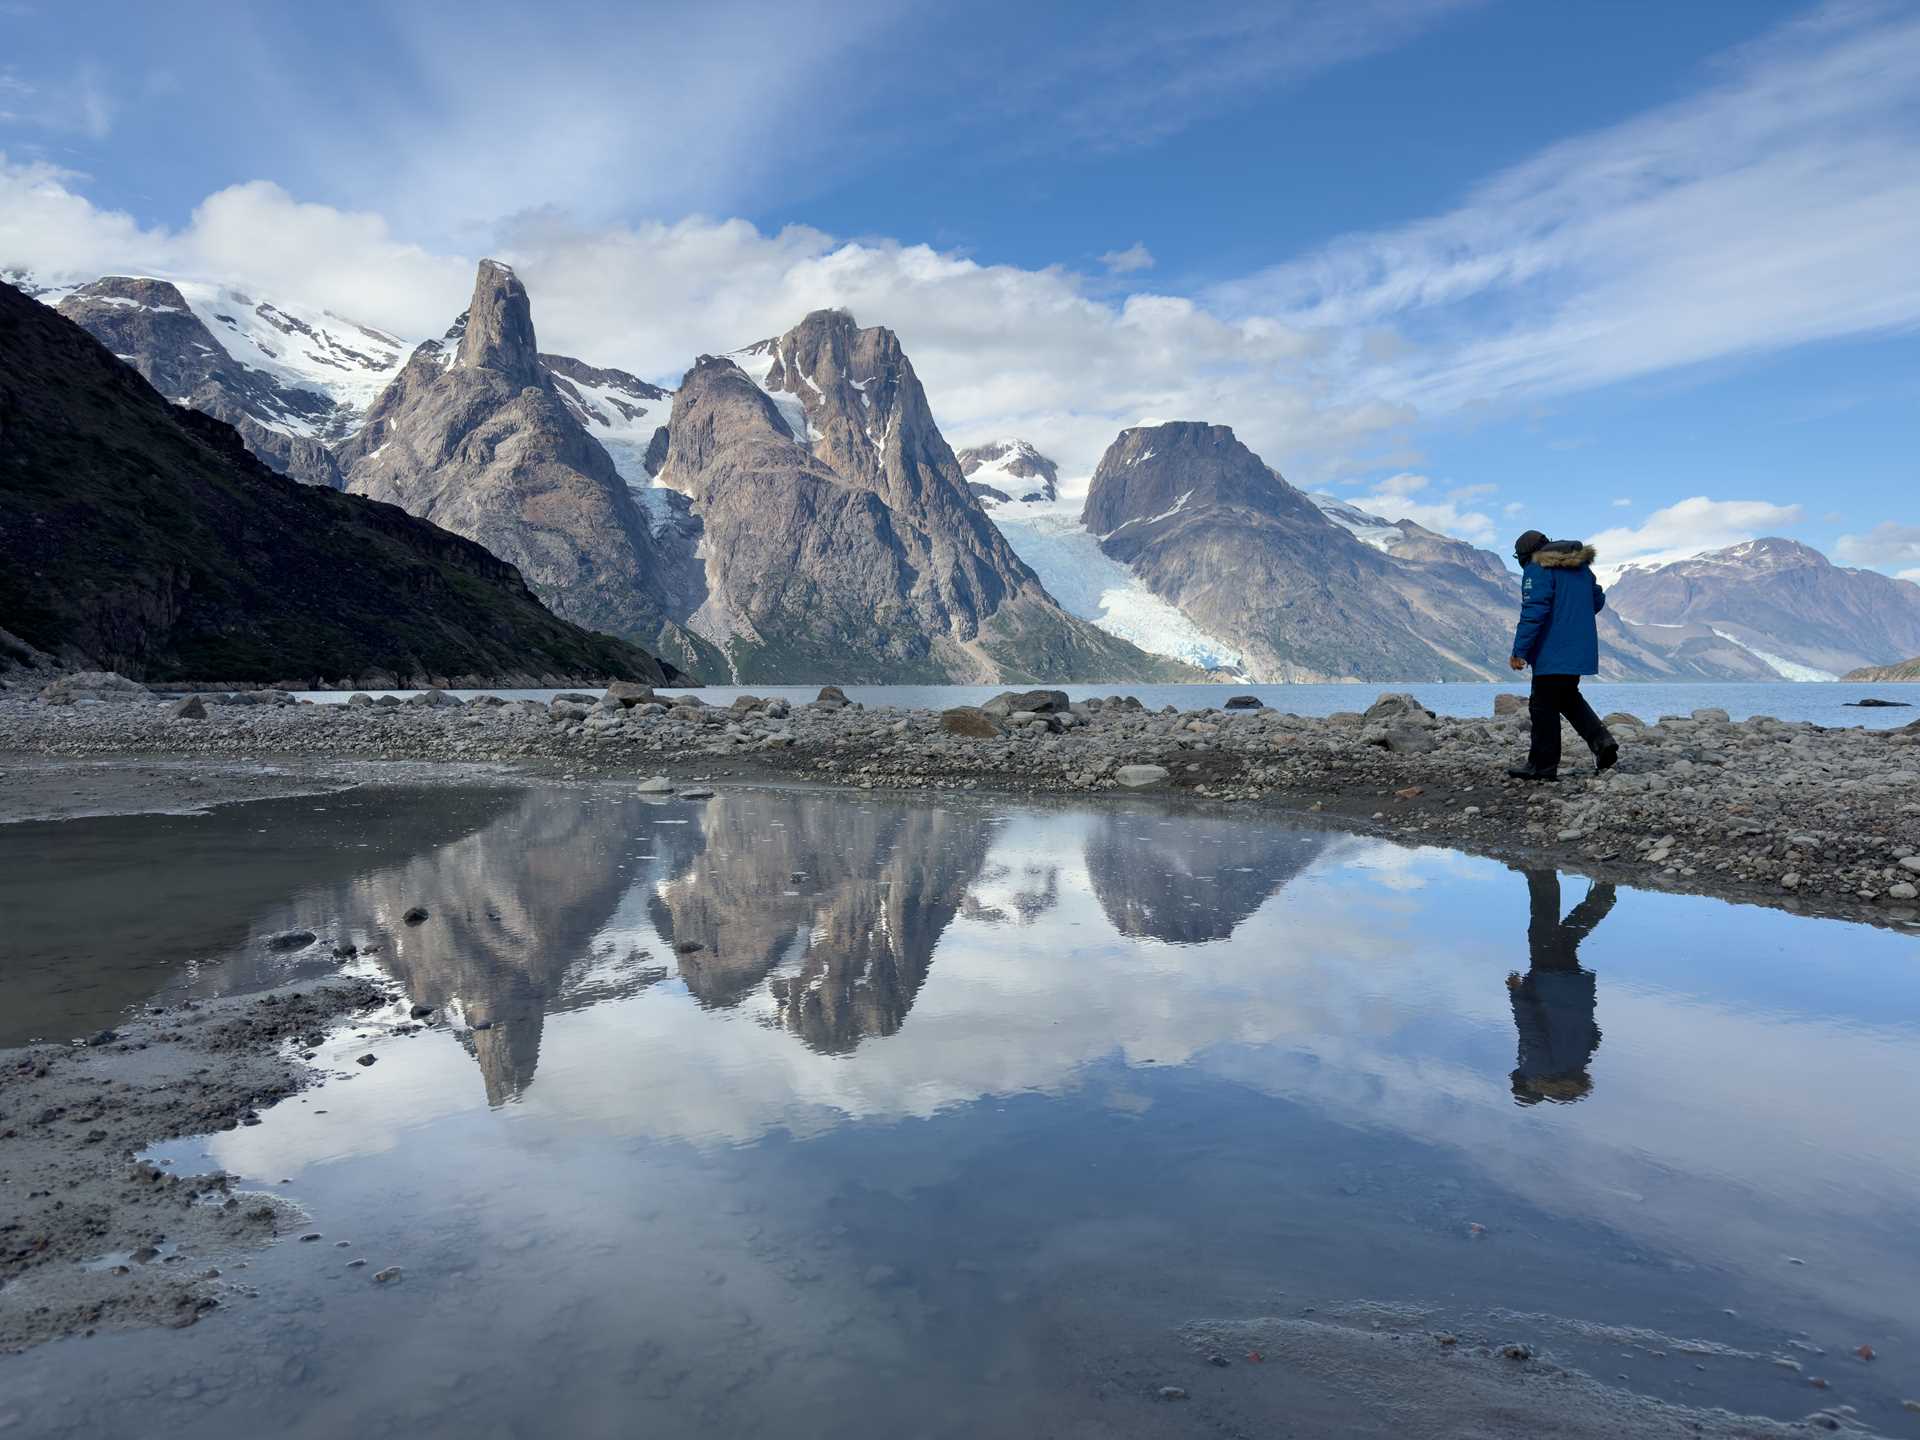 a person walks in front of mountains. the person and mountains are reflected in water below them